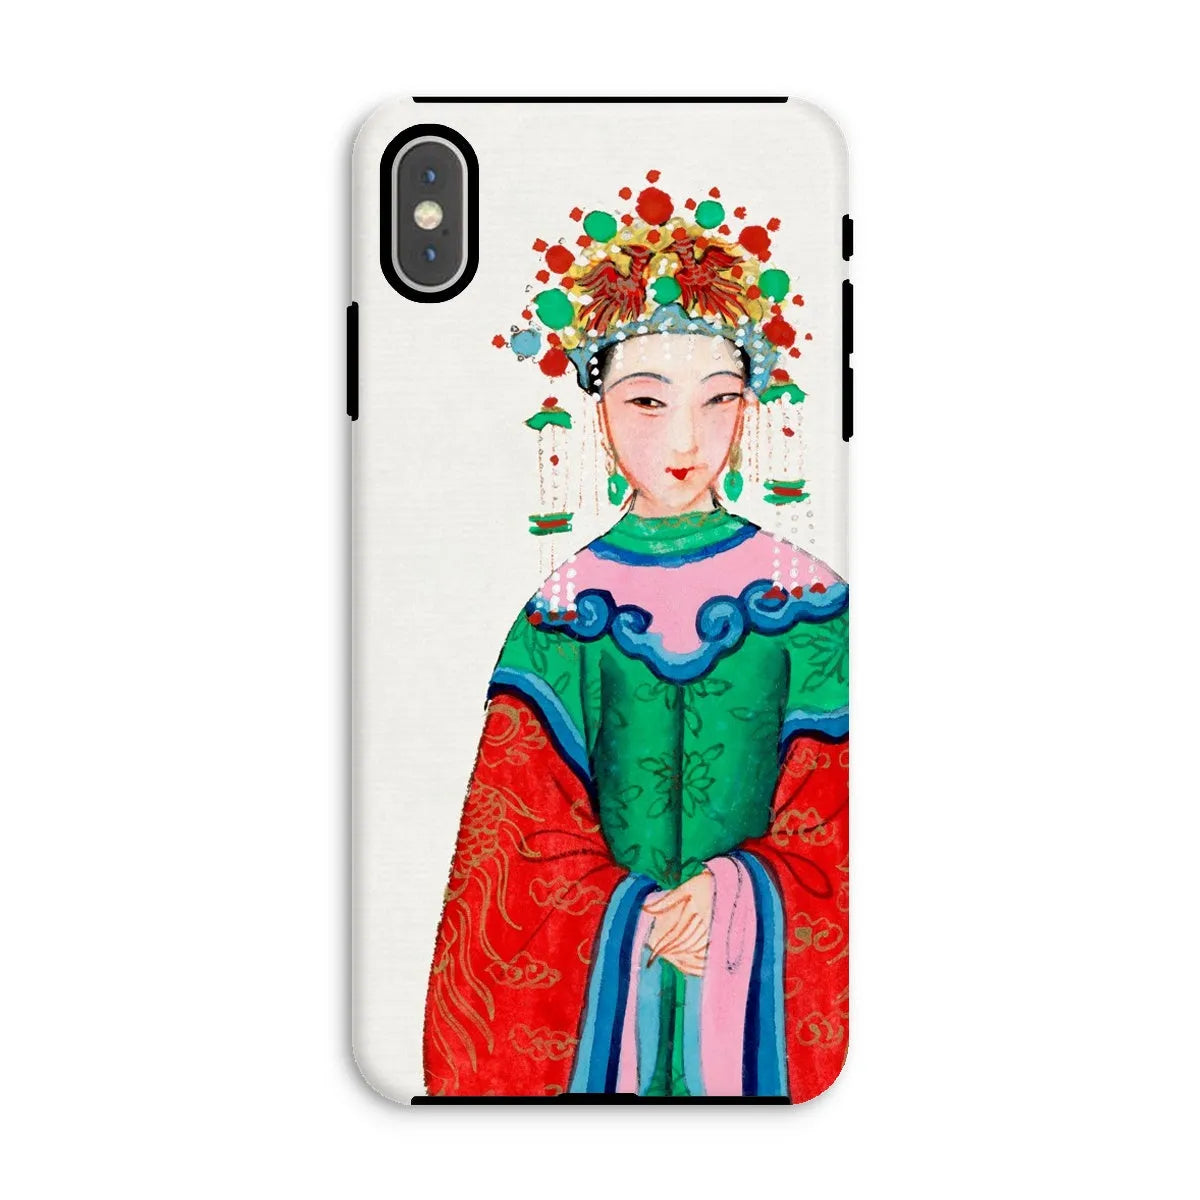 Imperial Princess - Chinese Aesthetic Painting Phone Case - Iphone Xs Max / Matte - Mobile Phone Cases - Aesthetic Art